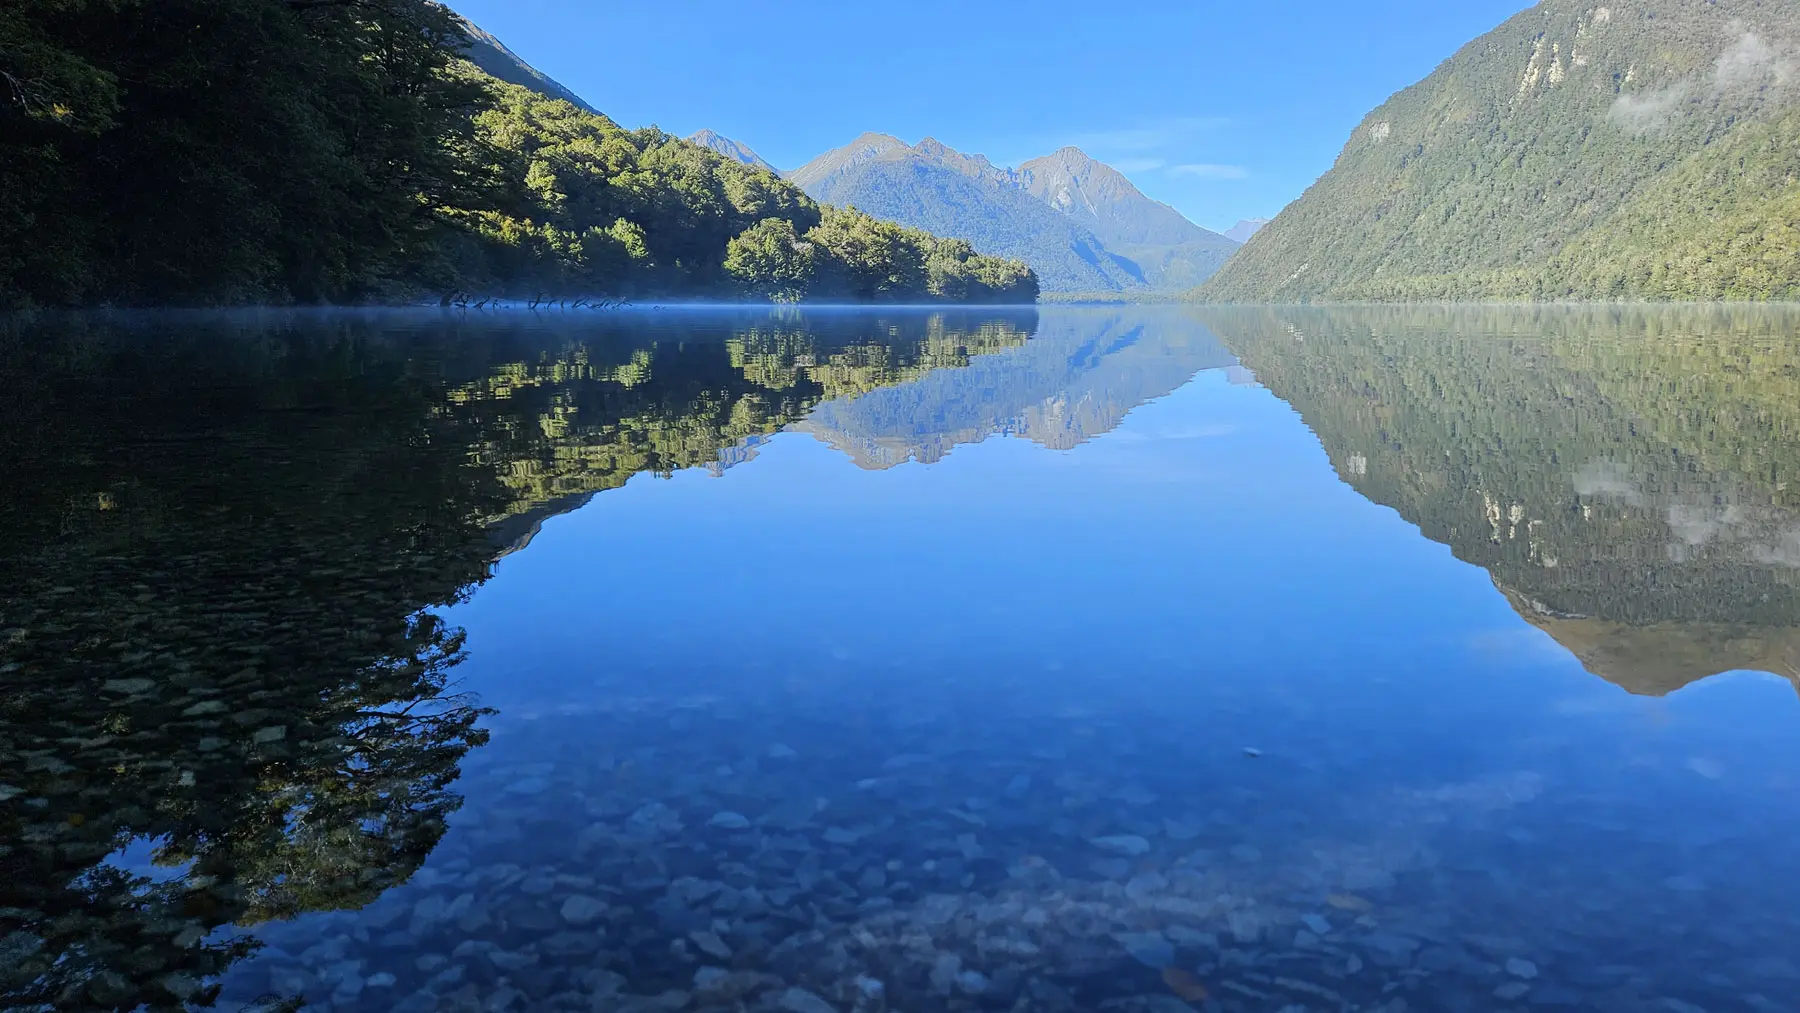 Amazing reflections of the moutains across Lake Gunn in Fiordland